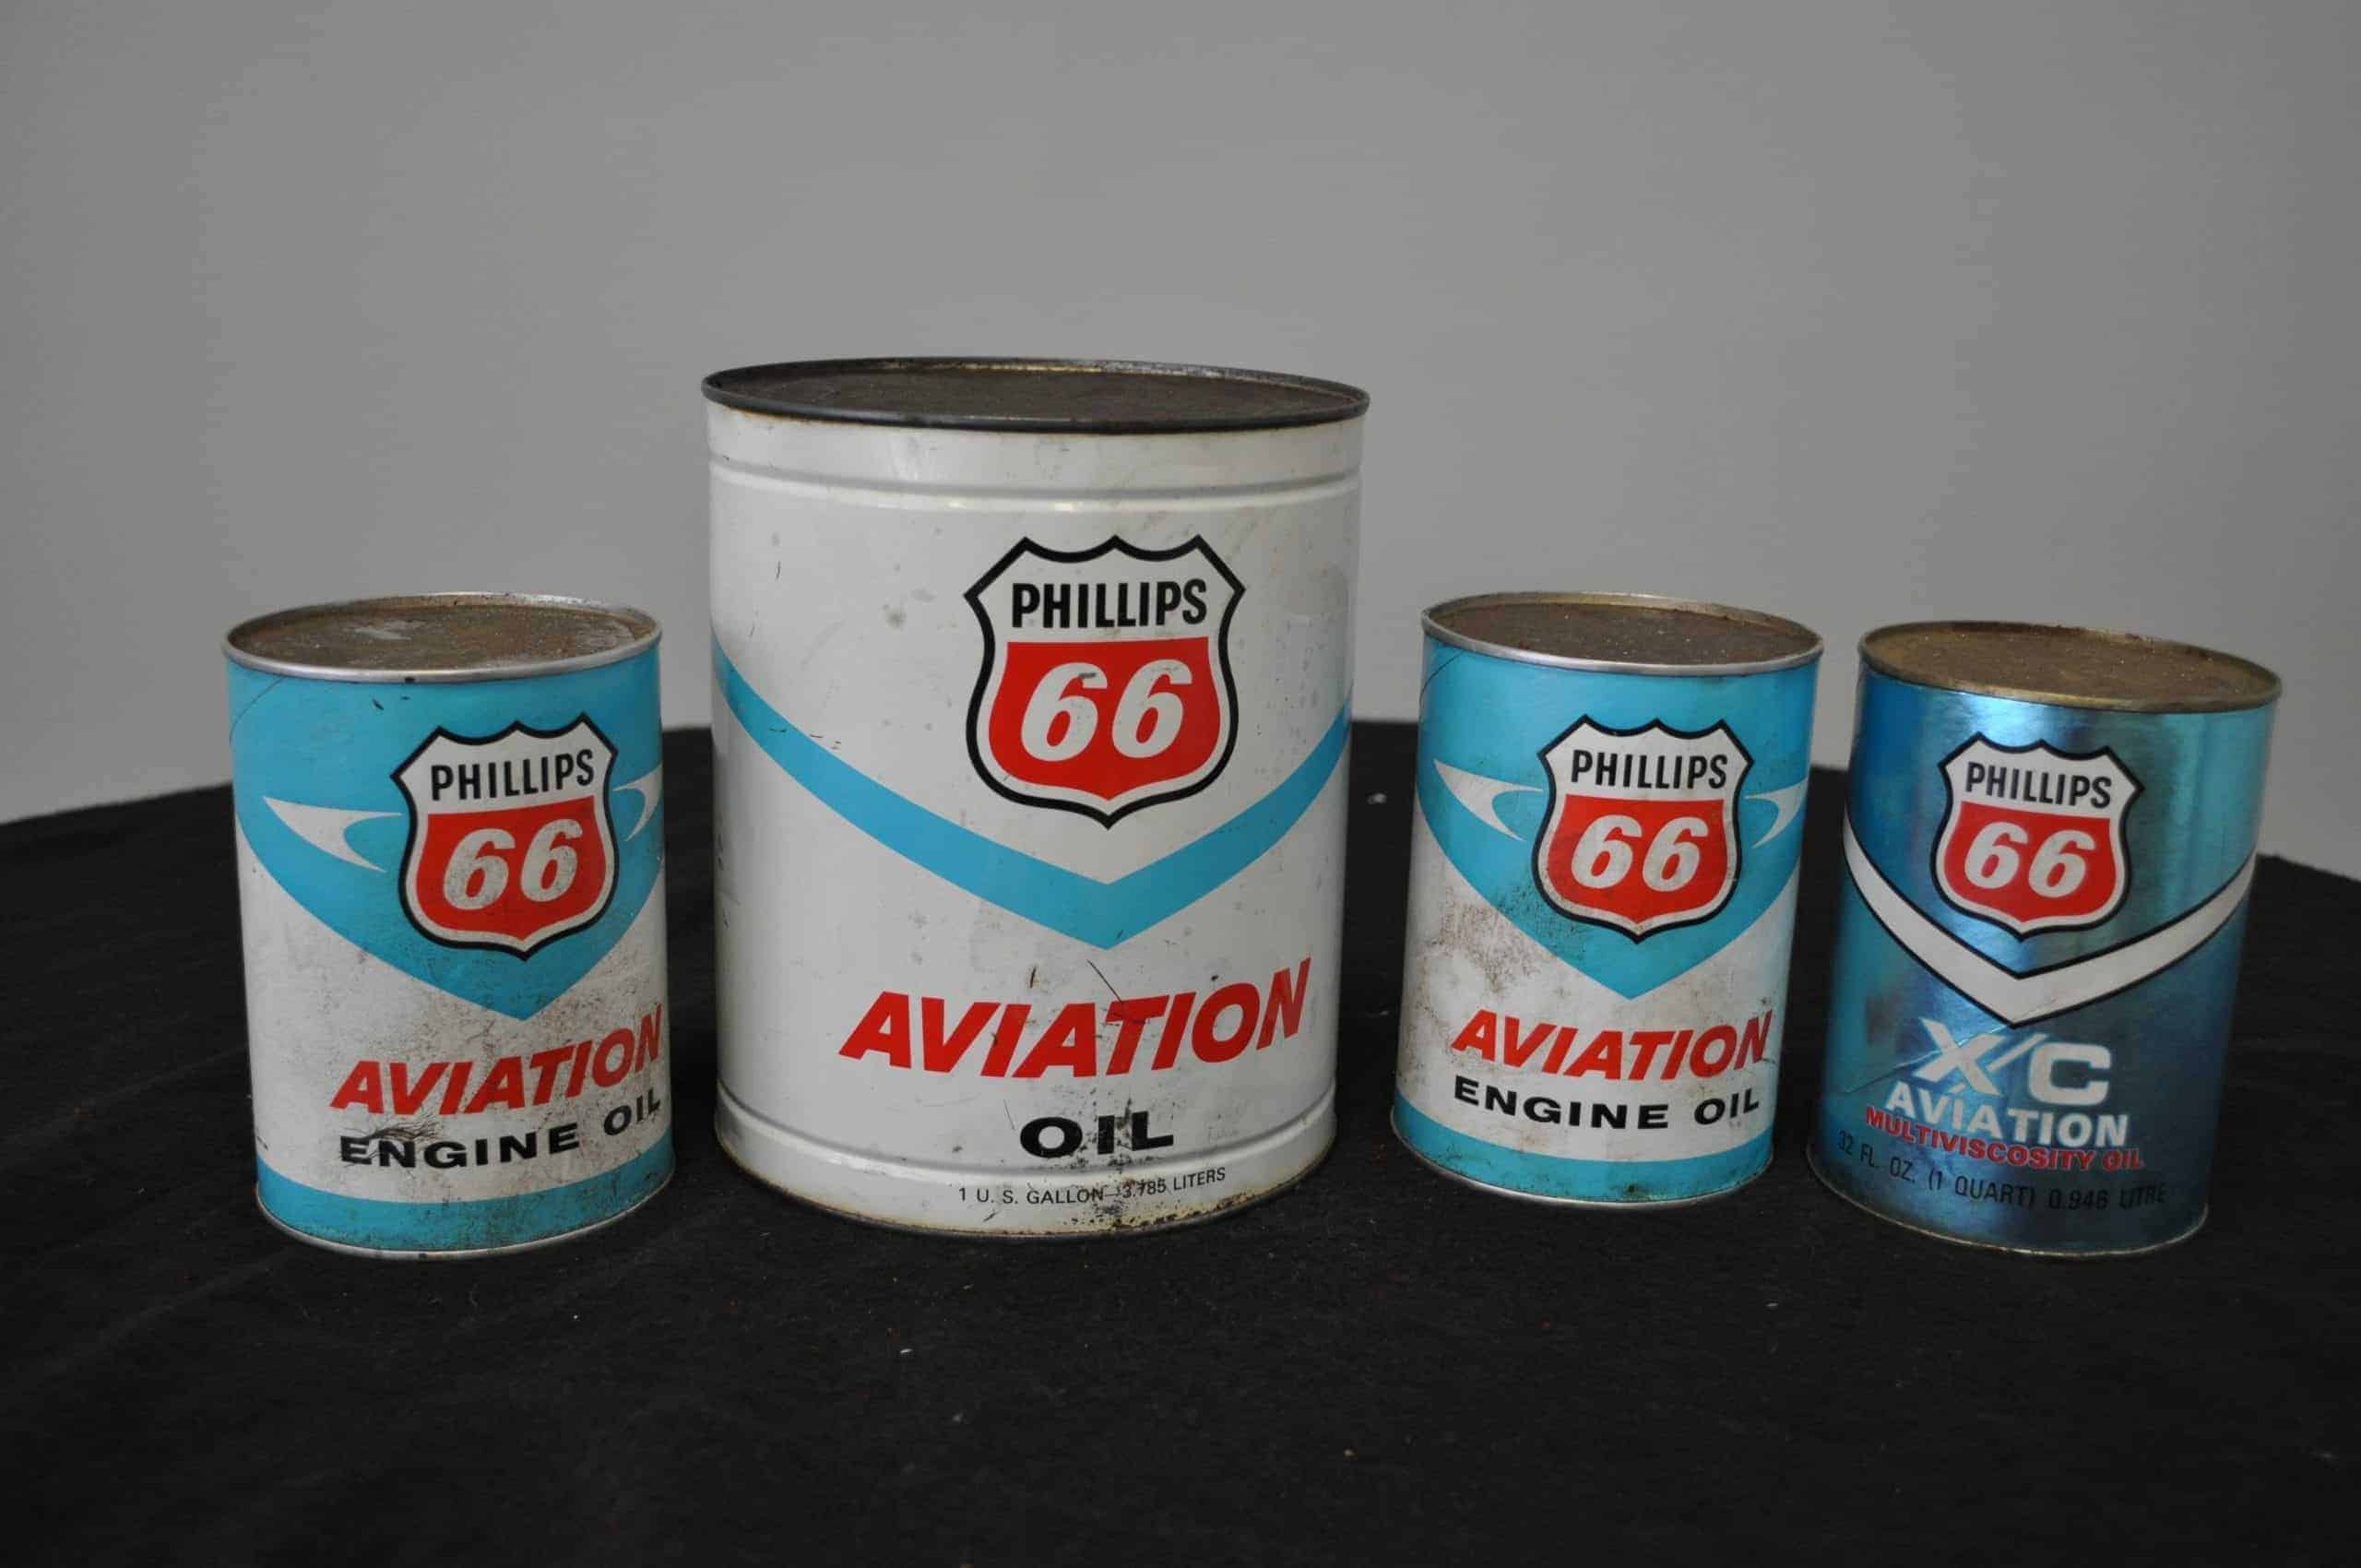 Philips 66 Aviation Oil Cans